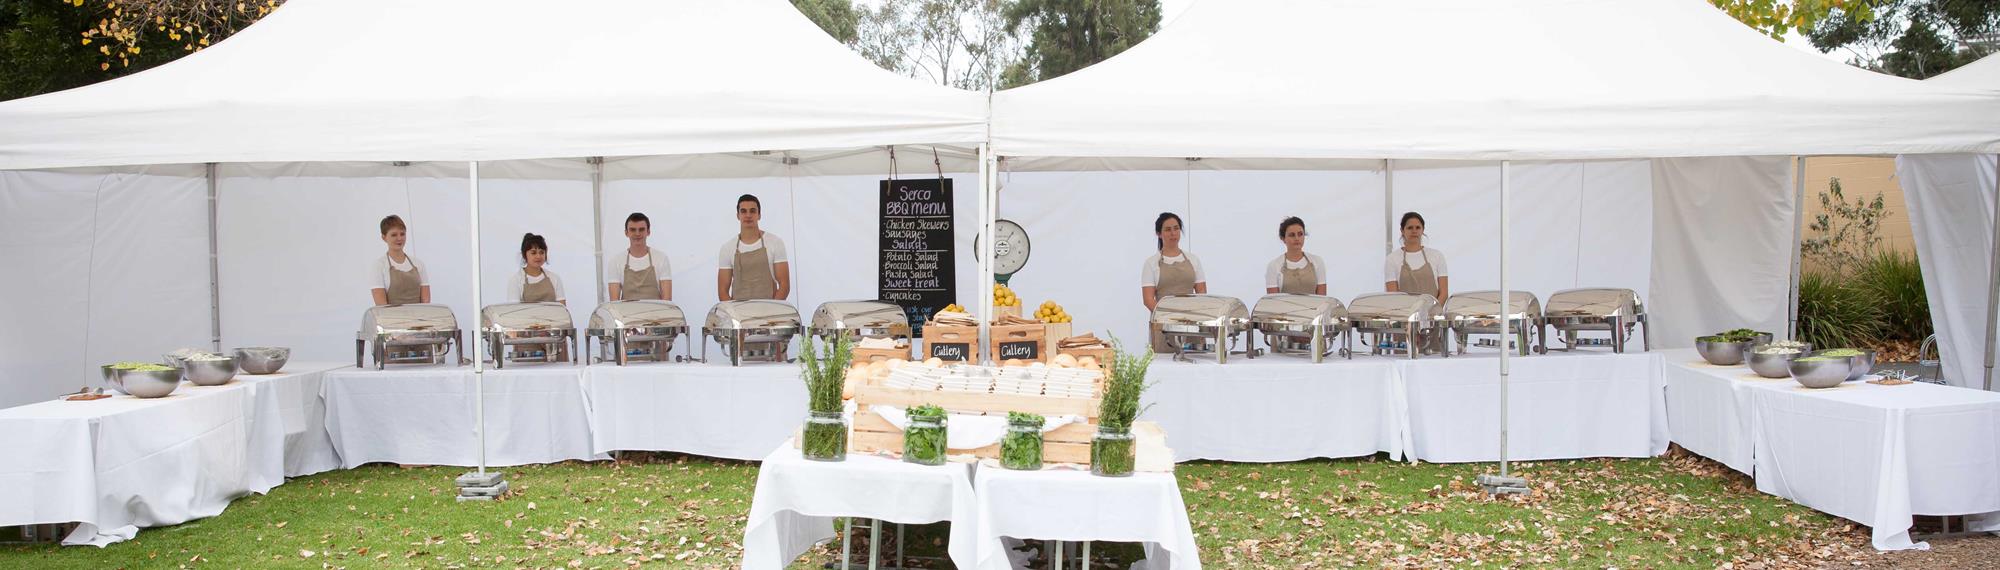 Marques provide a shady outdoor location to have a buffet style lunch for your next private event. 